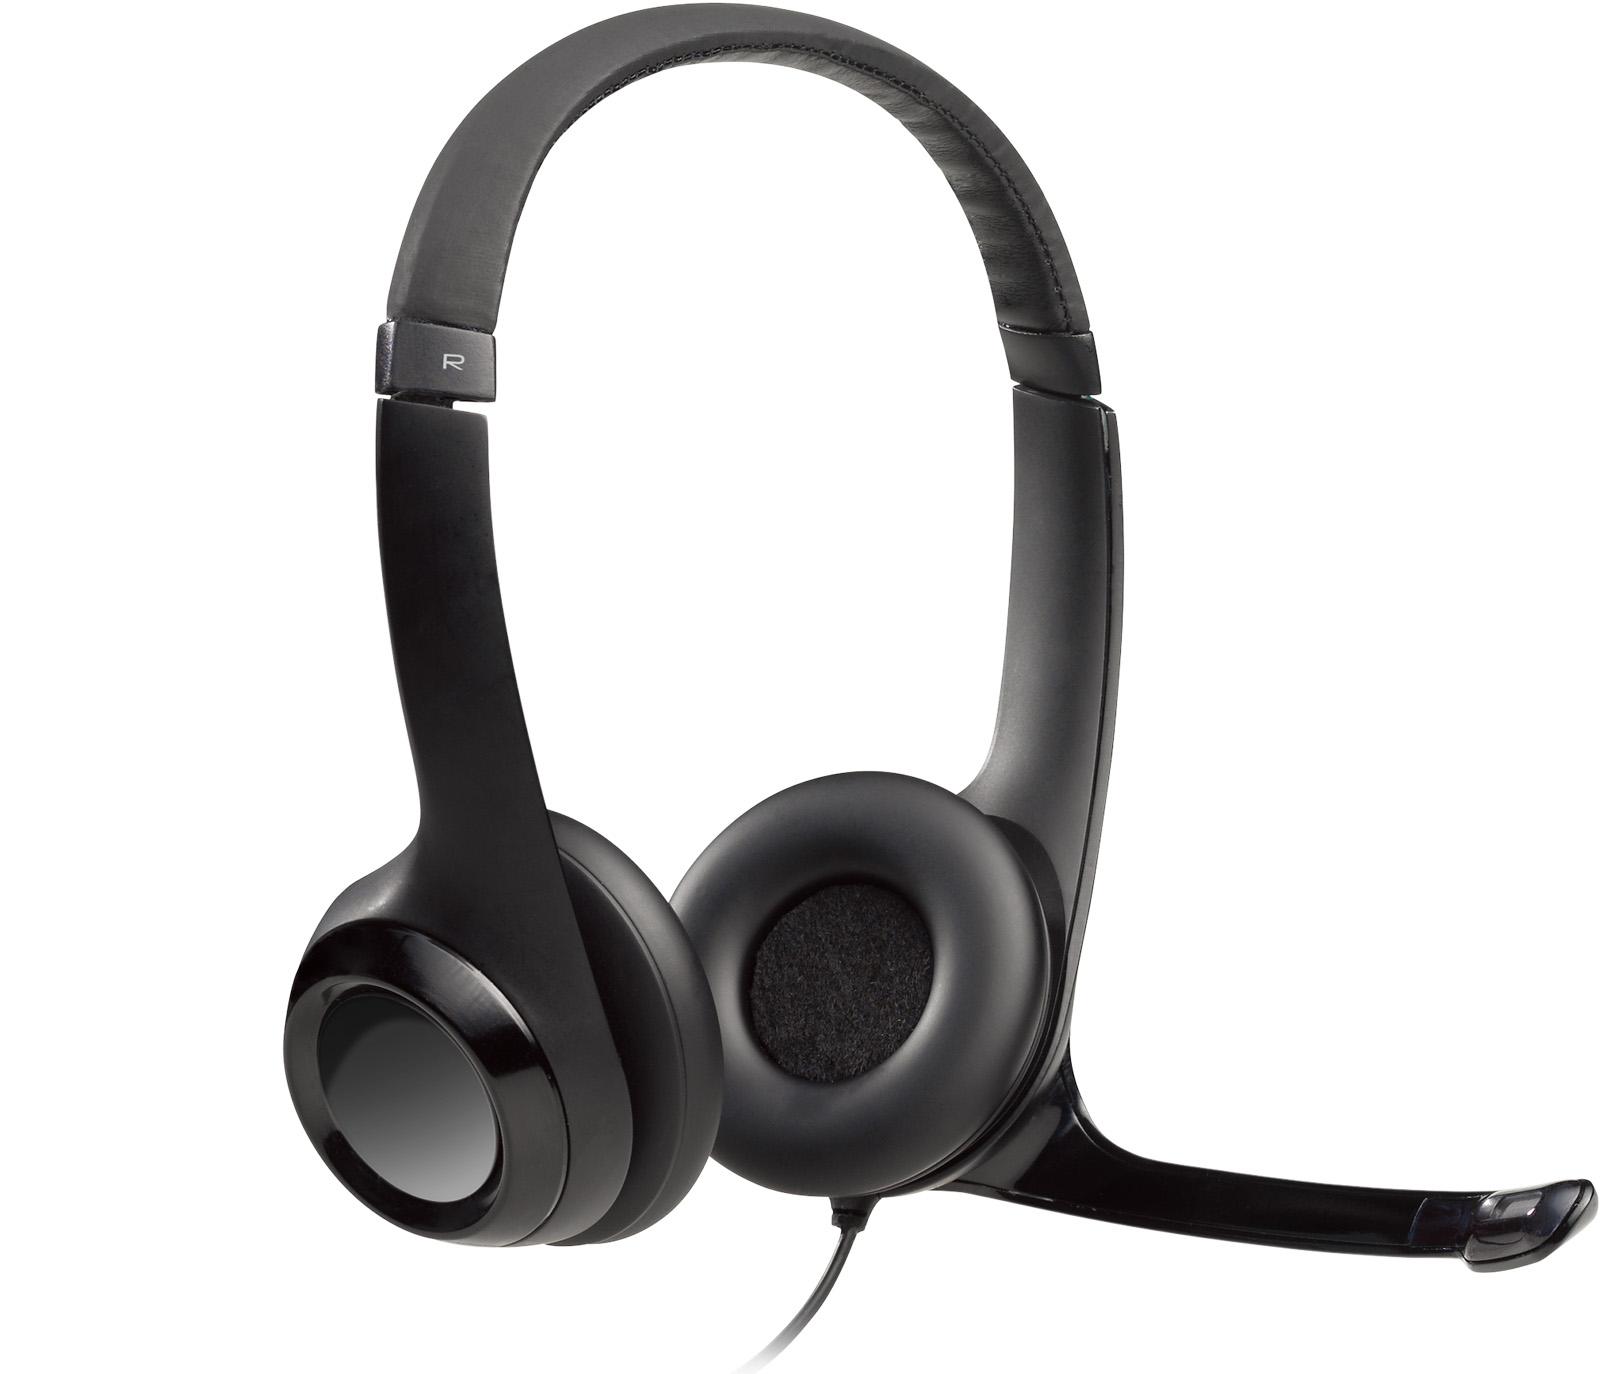 Logitech H390 On-Ear USB Wired Headset for $4.99